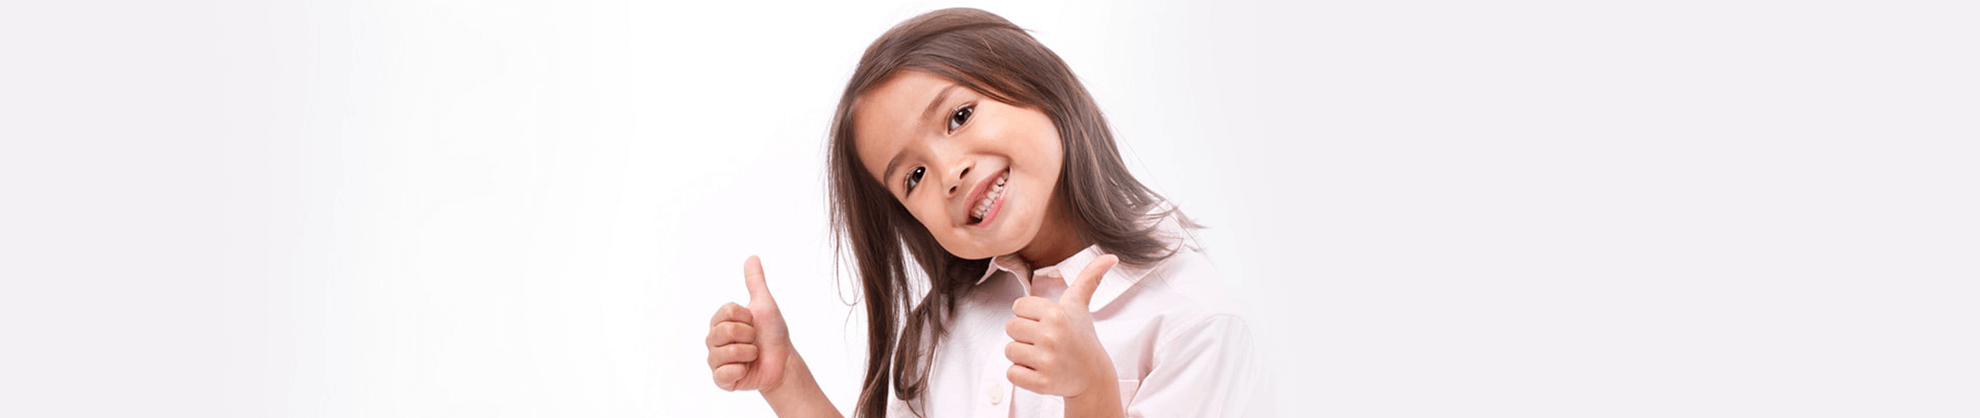 Pediatric Dentistry in Coral Springs and Parkland